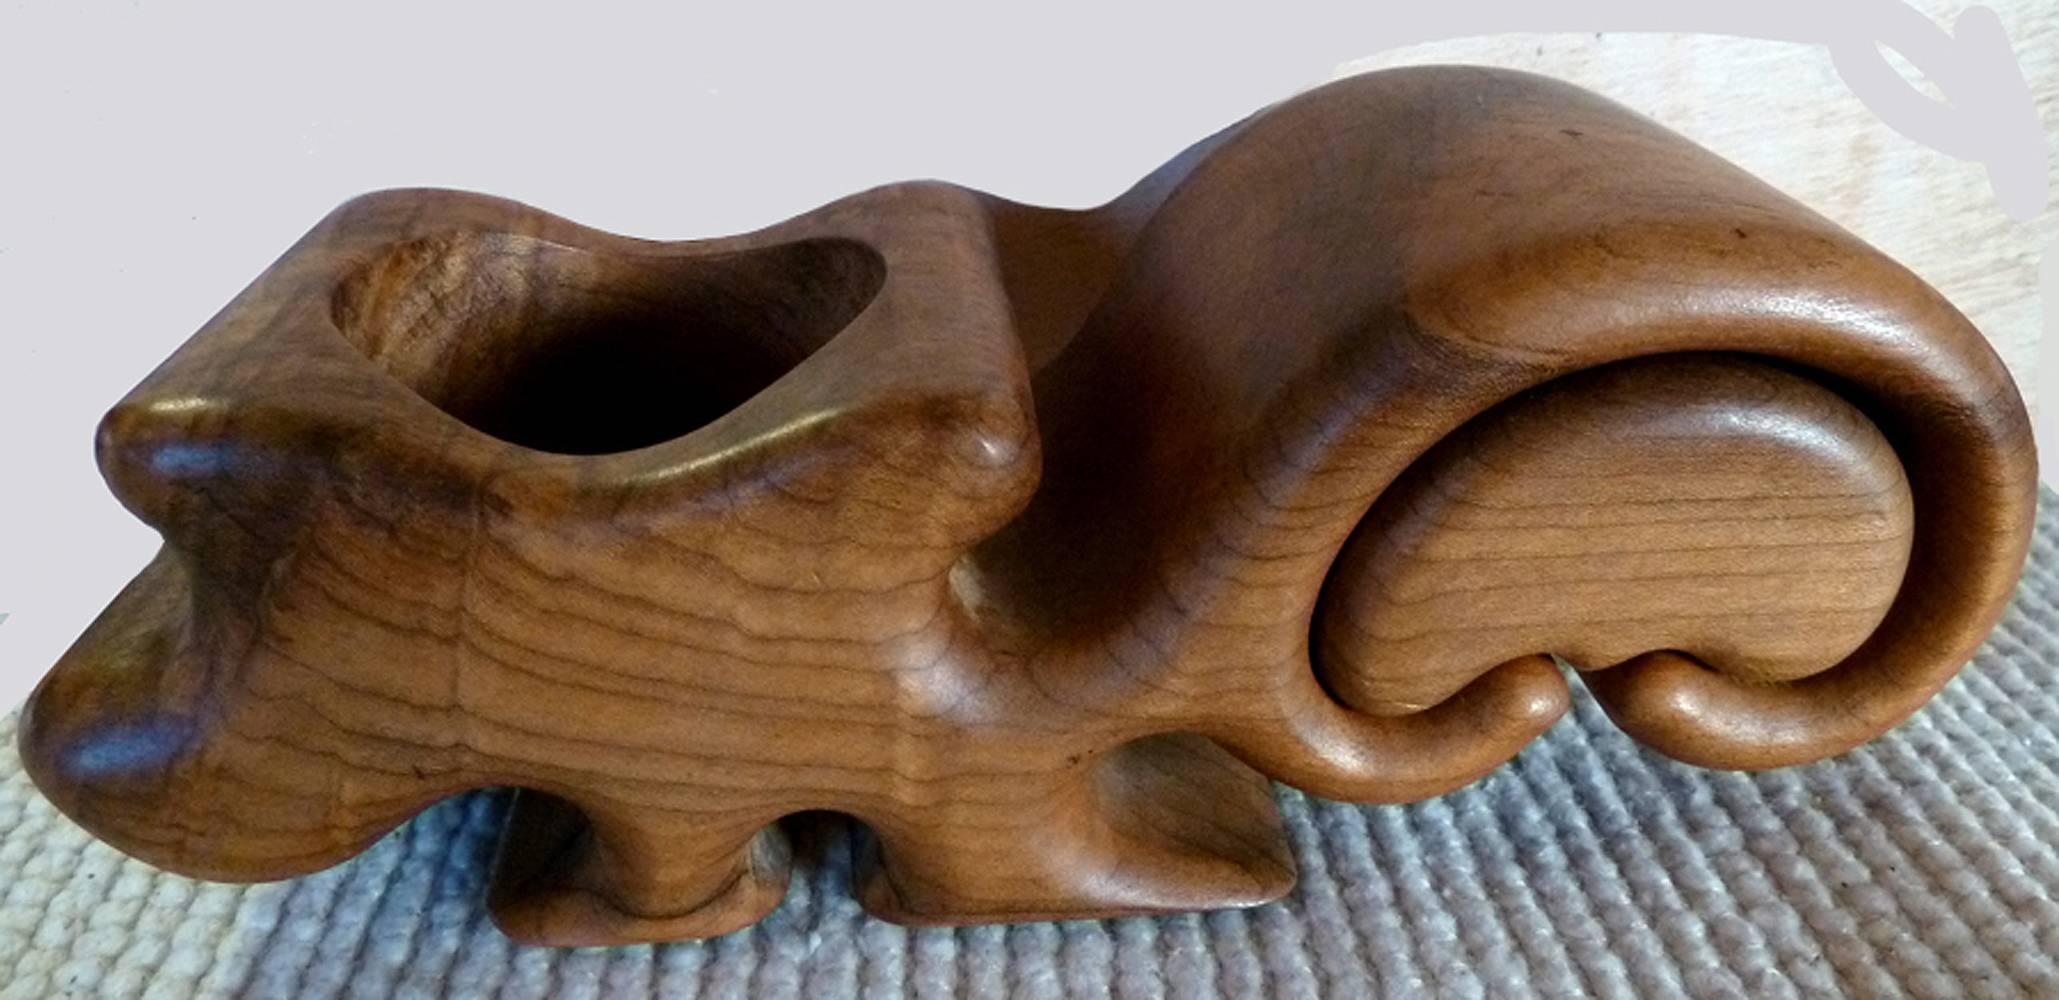 Decorative box or keepsake holder has a beautiful wood grain and seems to resemble a squirrel. Has one small pullout drawer and one circular opening at the top, perhaps to hold a candle or small valuables.